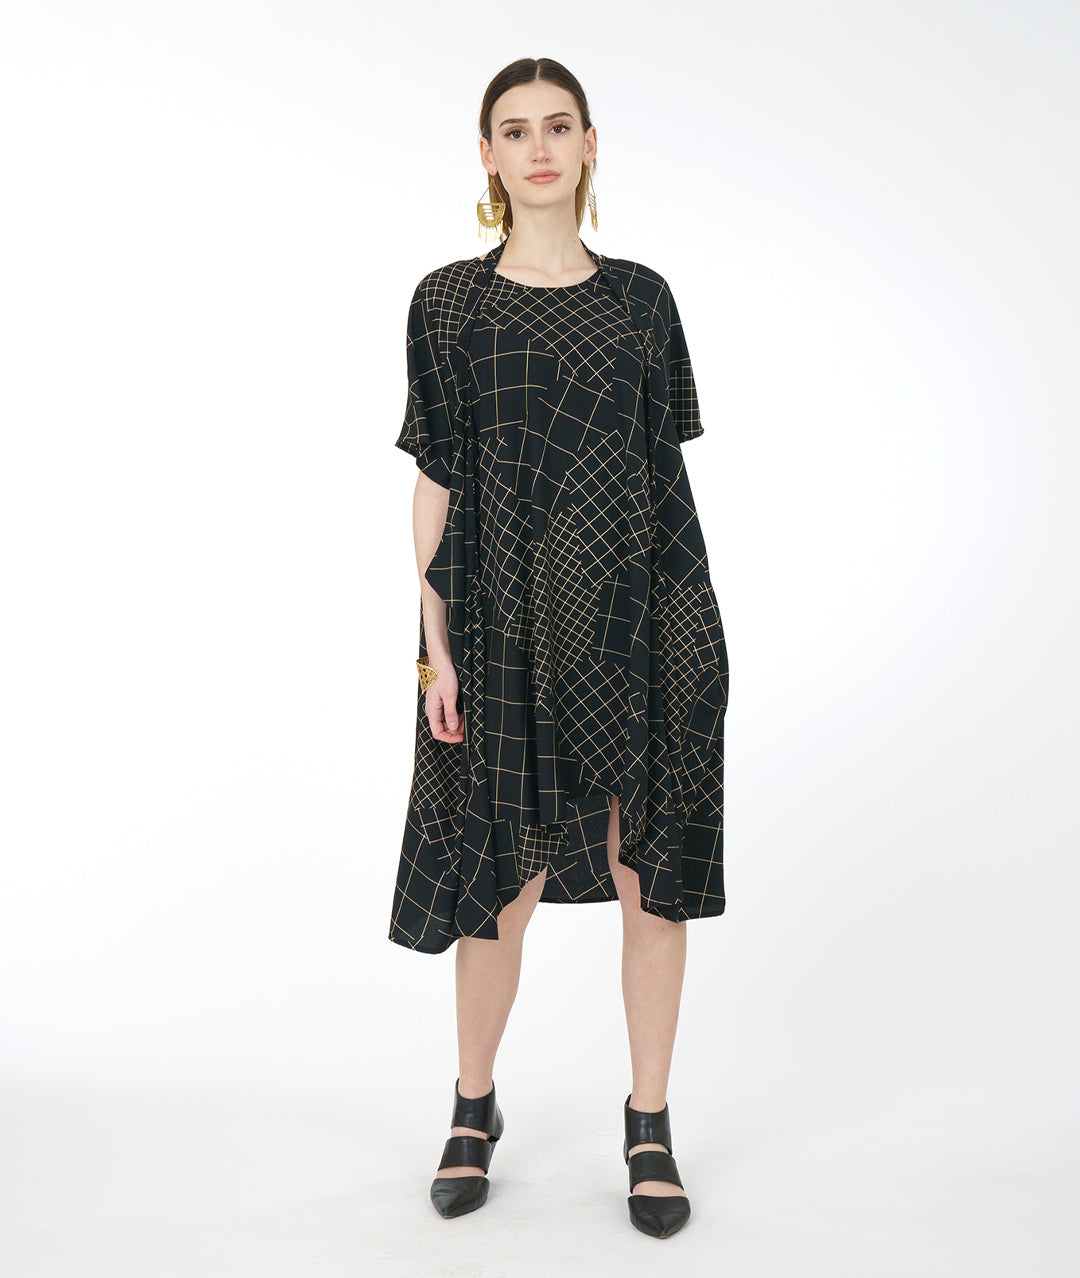 model in a black convertable tunic with an ivory grid pattern. tunic has a band from the hips that can be worn in different styles